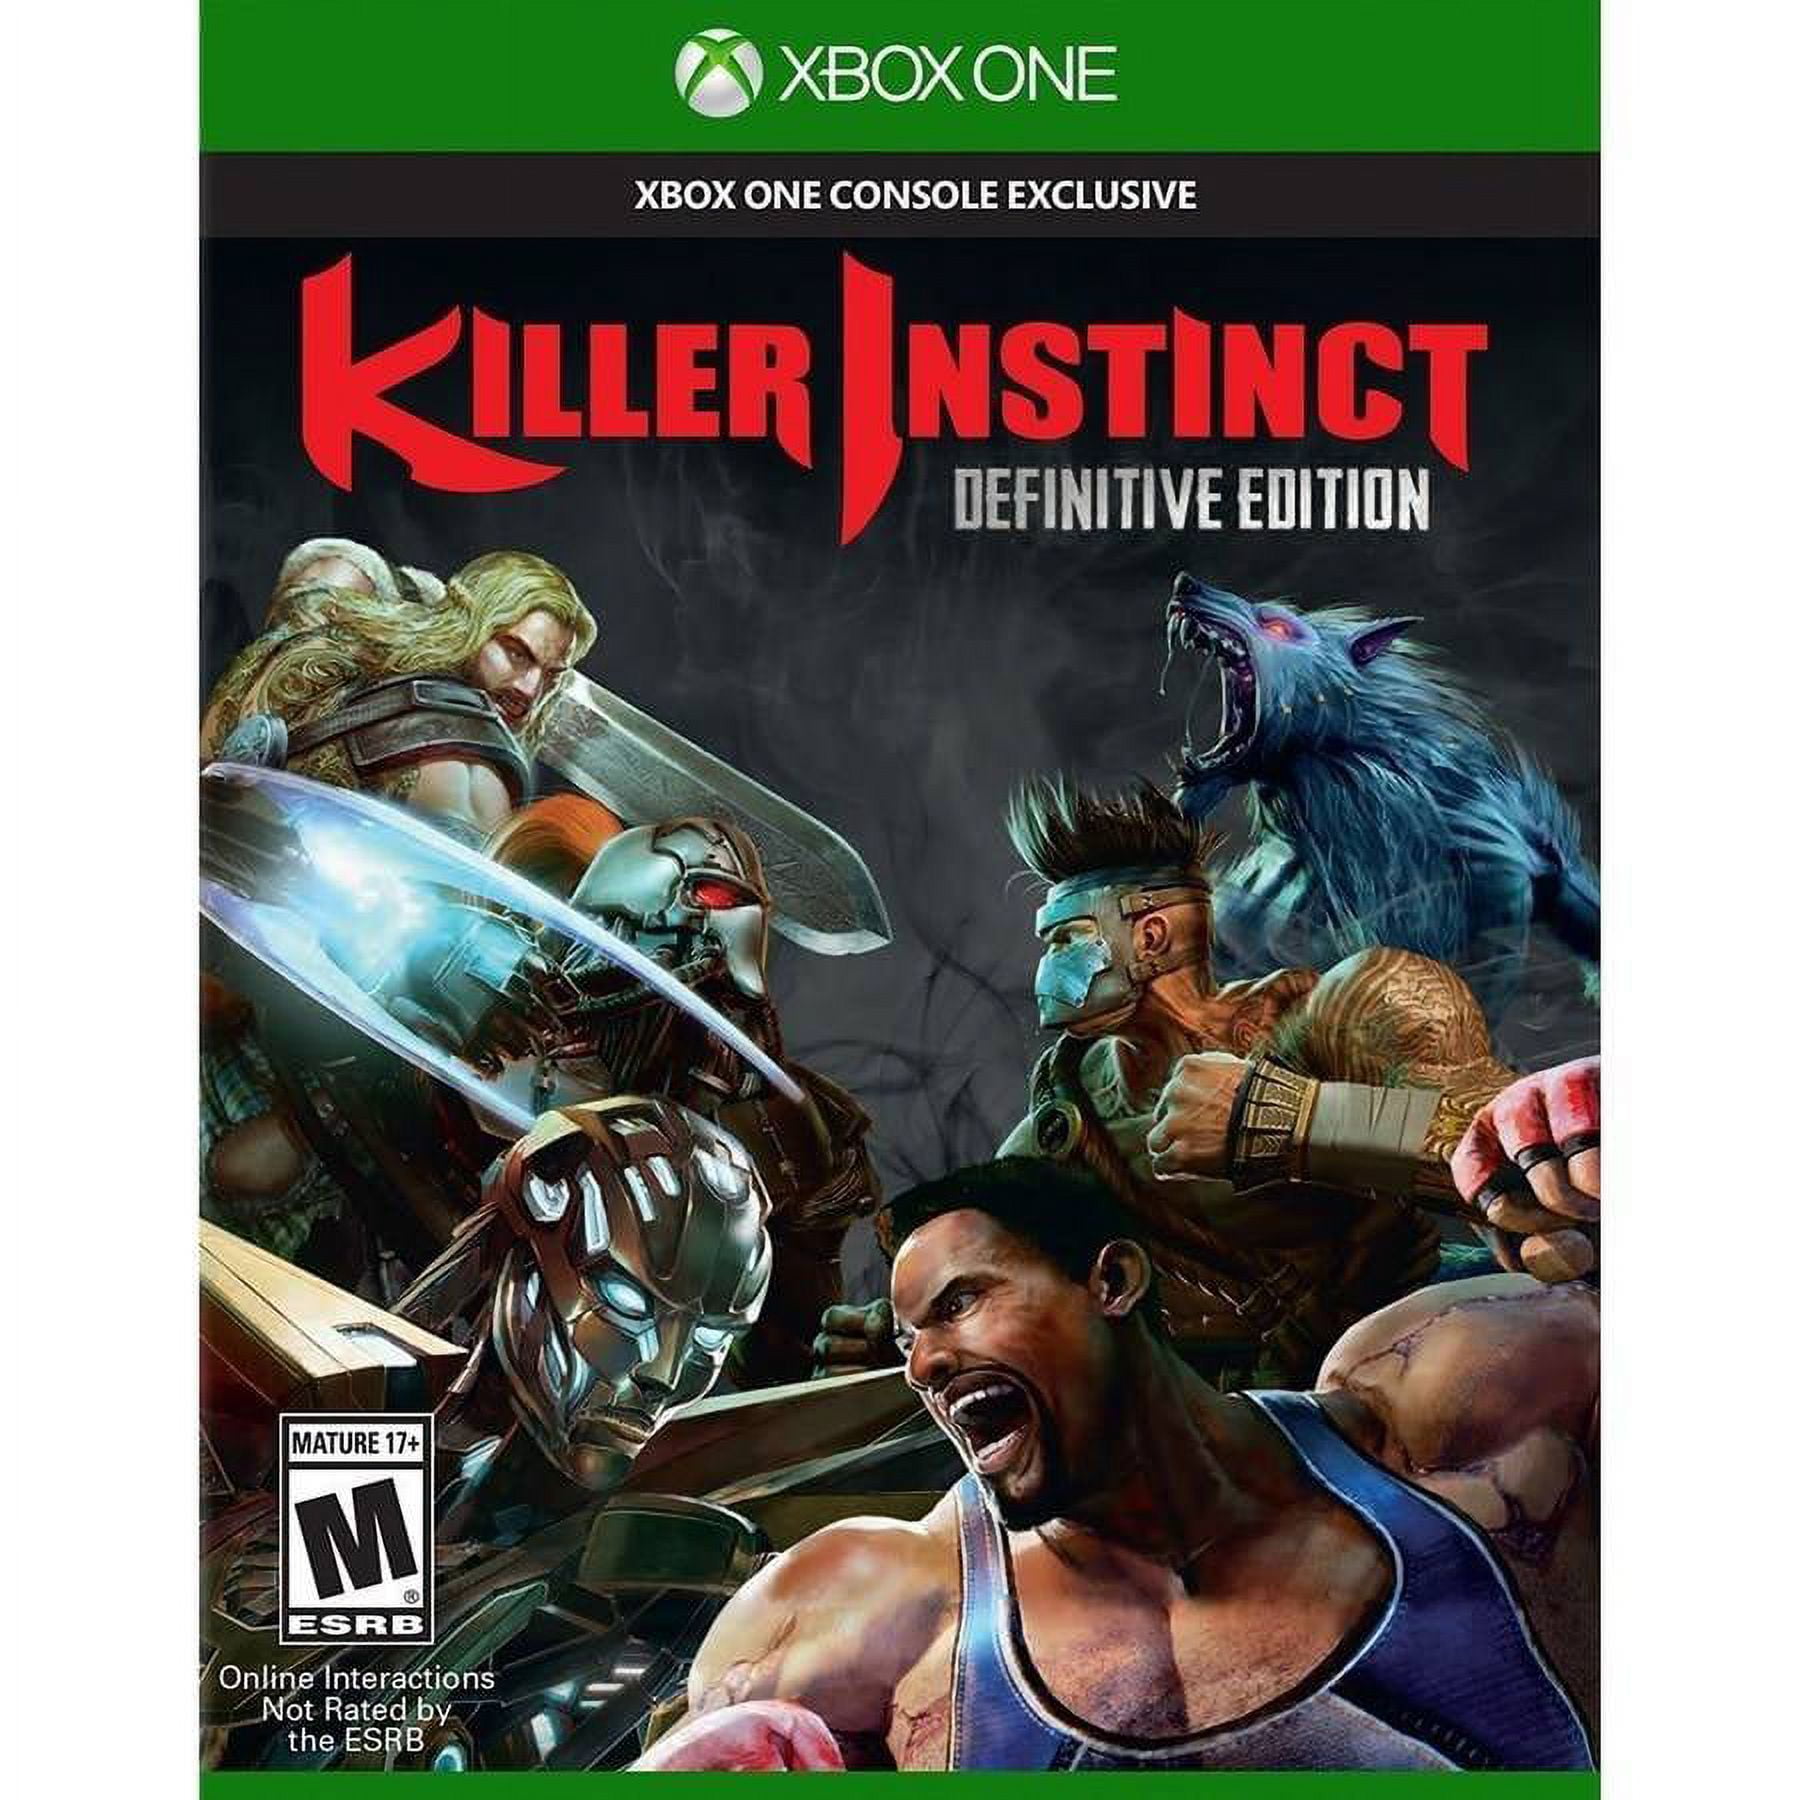 Xbox Games with Gold: You can now get Killer Instinct Season 2 and